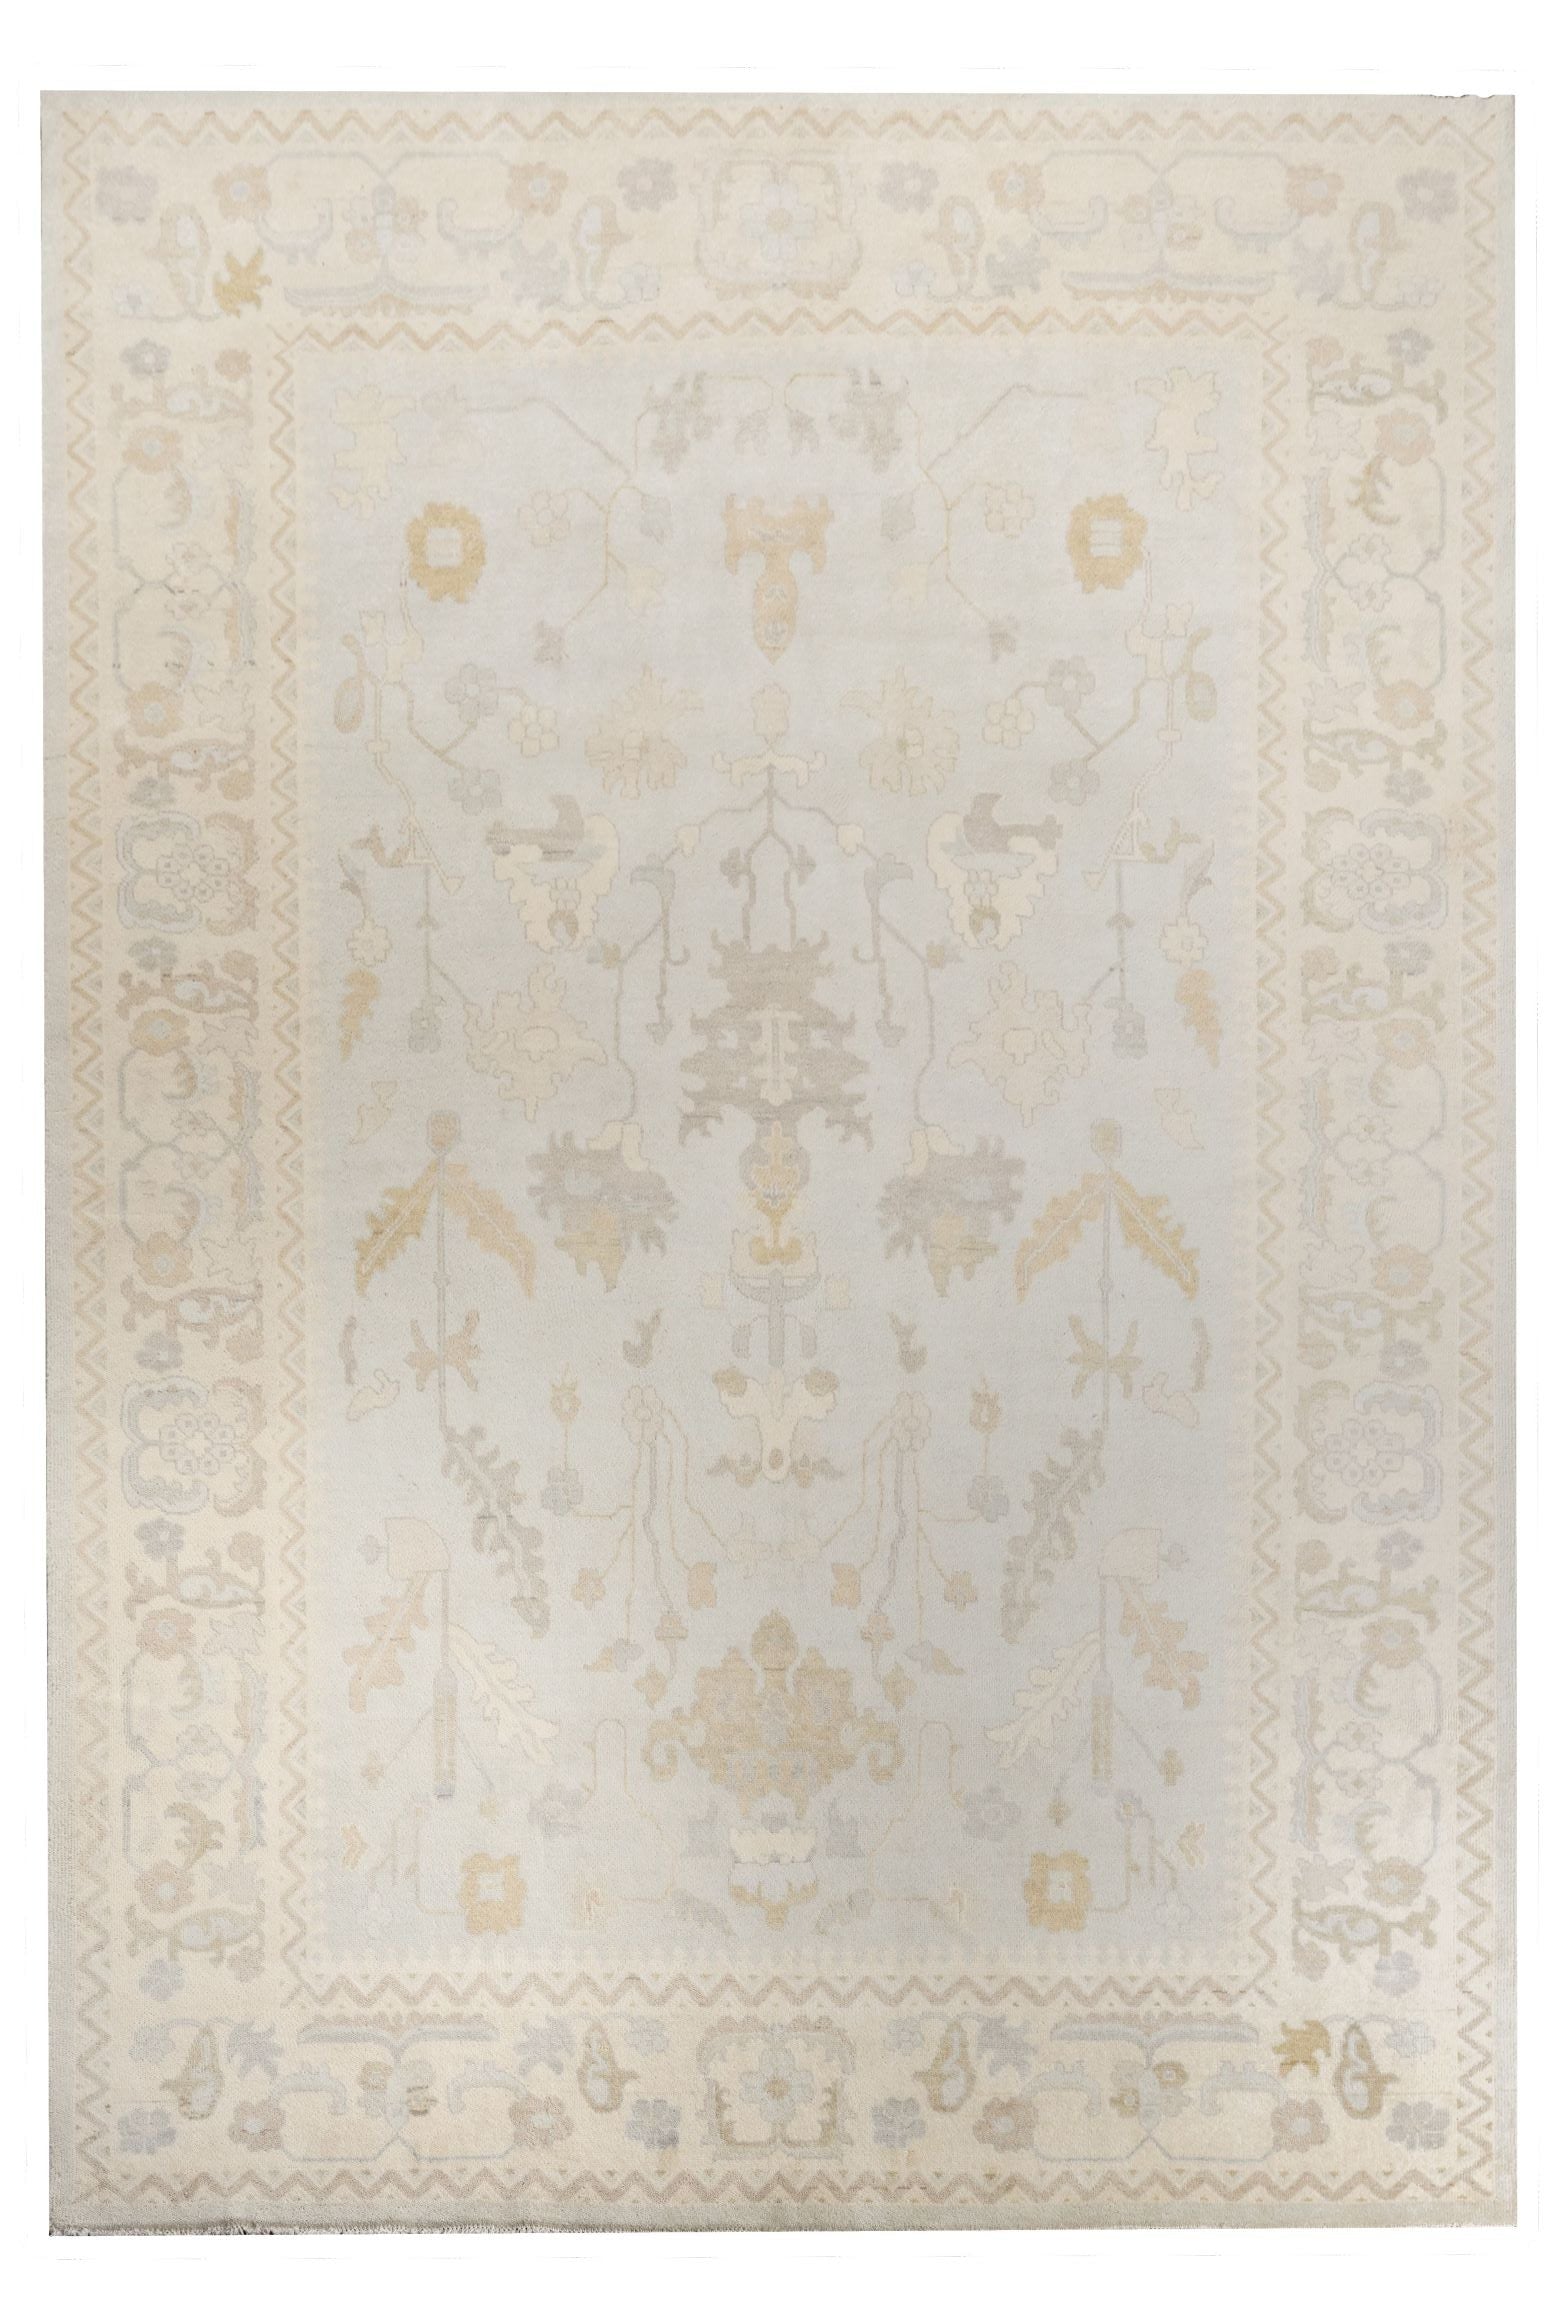 Neutral toned and hand-knotted Oushak style rug made of 100% New Zealand wool. This rug is comprised of tan, beige, brown, gray, and blue colors. 